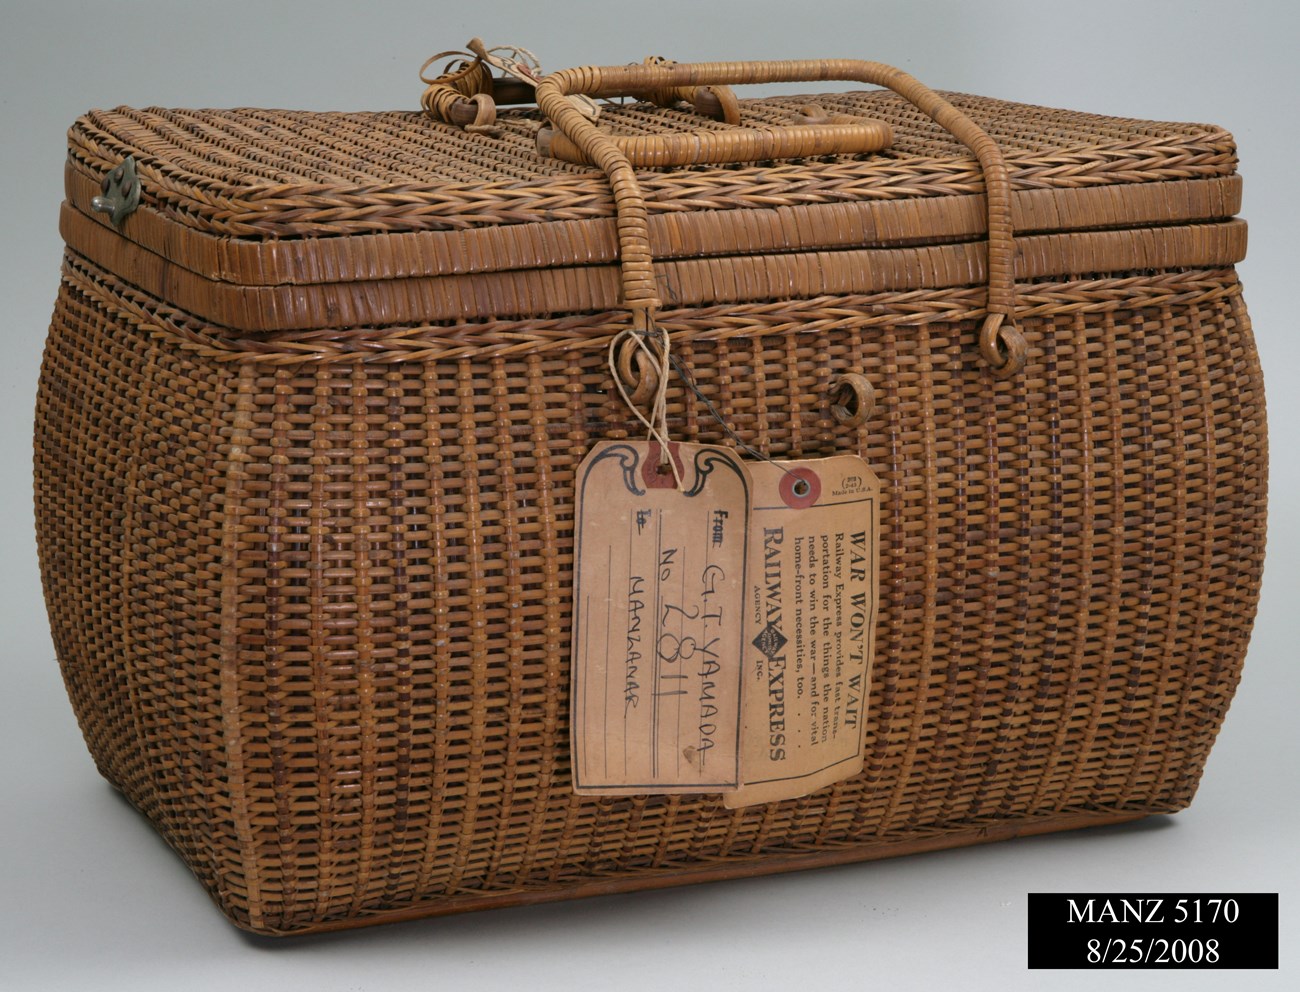 Wicker basket with handles and tags